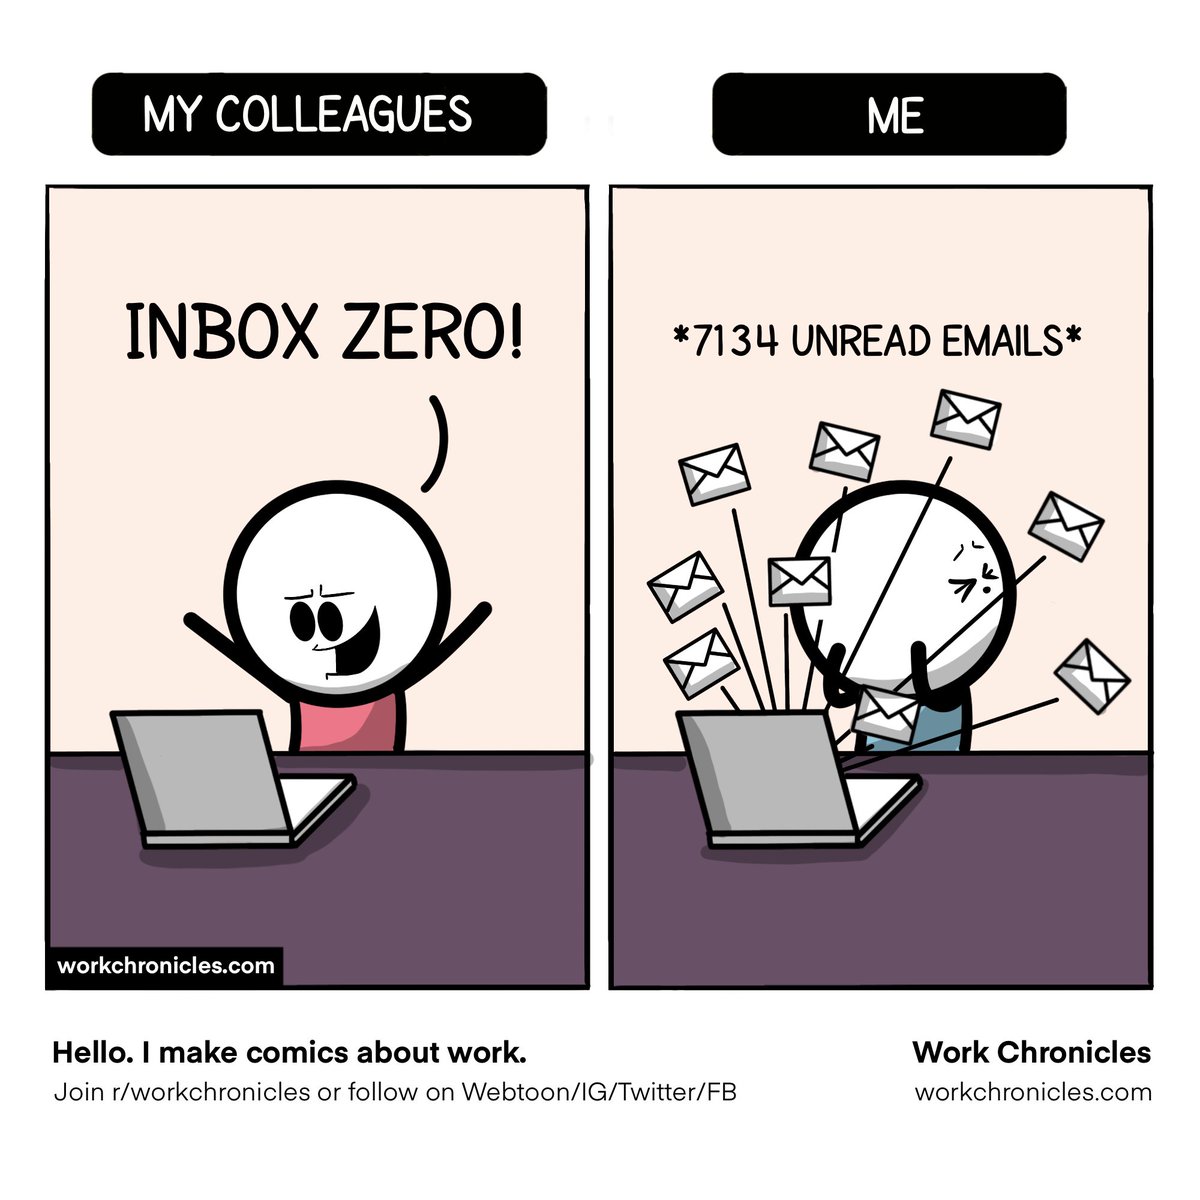 Your colleagues’ secret? 1. Select all emails 2. Mark them as read, delete them, or move them to a designated folder. Try it today on the #ProtonMail web app: mail.proton.me Comic courtesy of @_workchronicles #inbox0